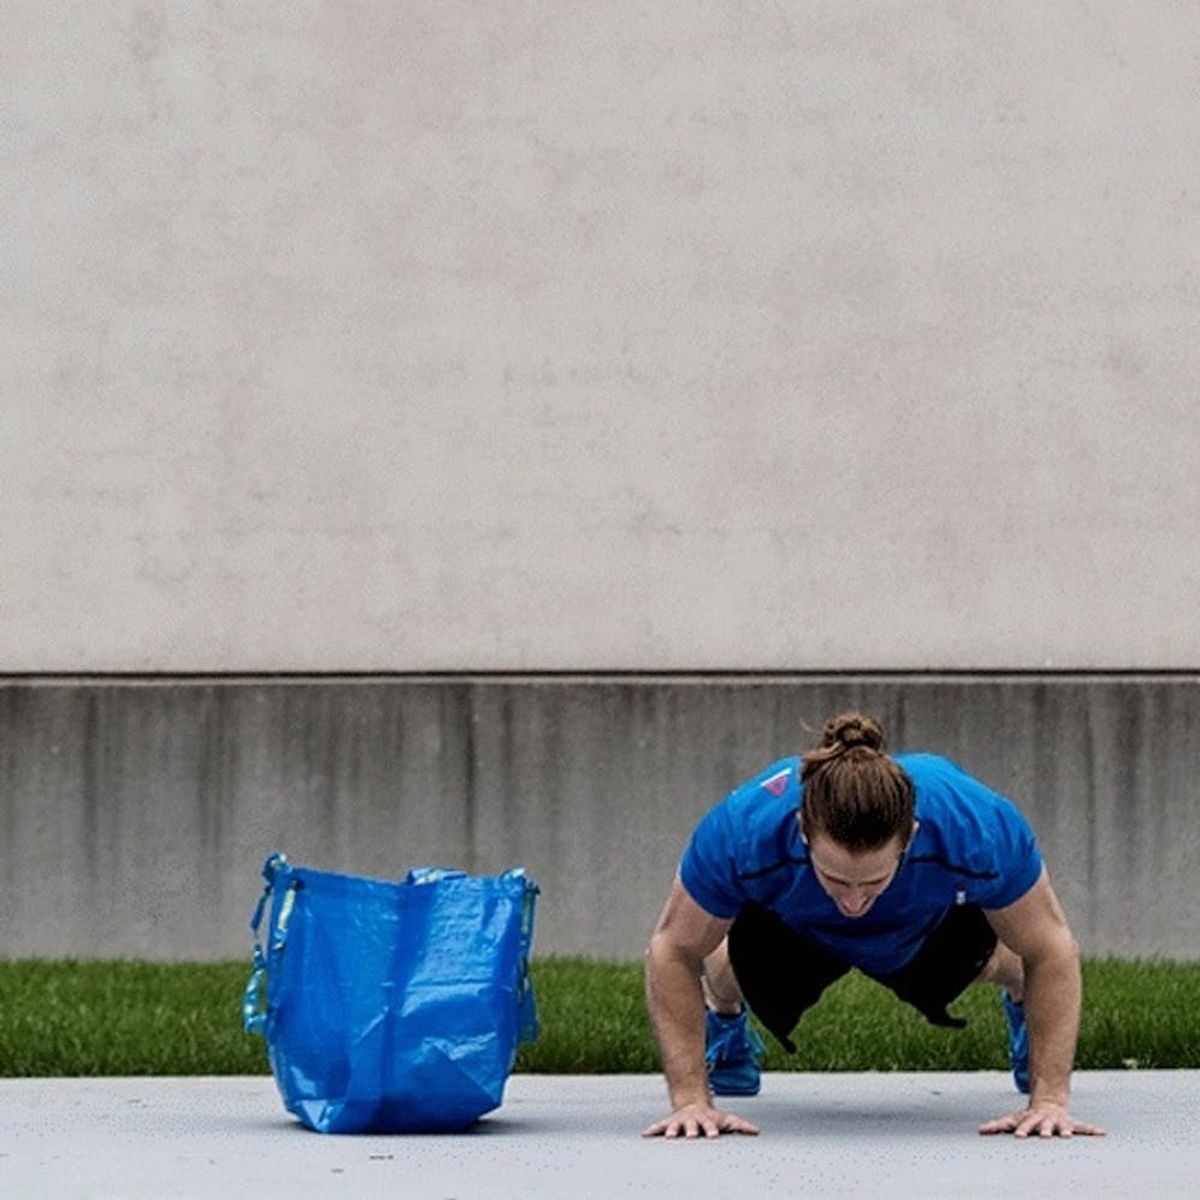 This IKEA Bag Hack Will Give You a Full-Body Workout